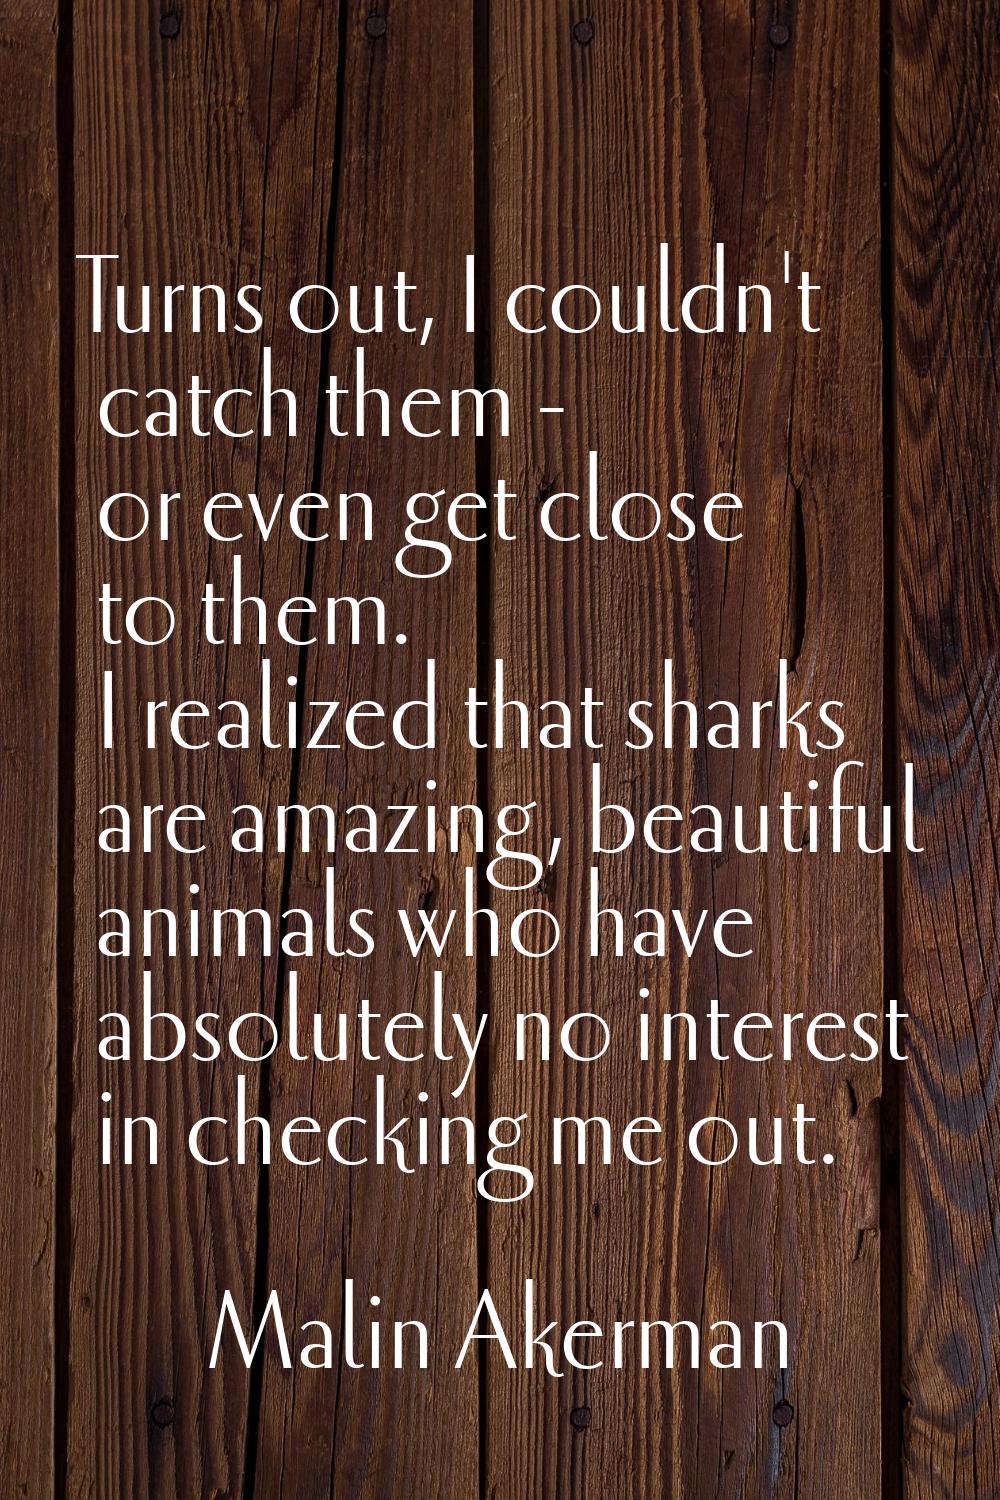 Turns out, I couldn't catch them - or even get close to them. I realized that sharks are amazing, b